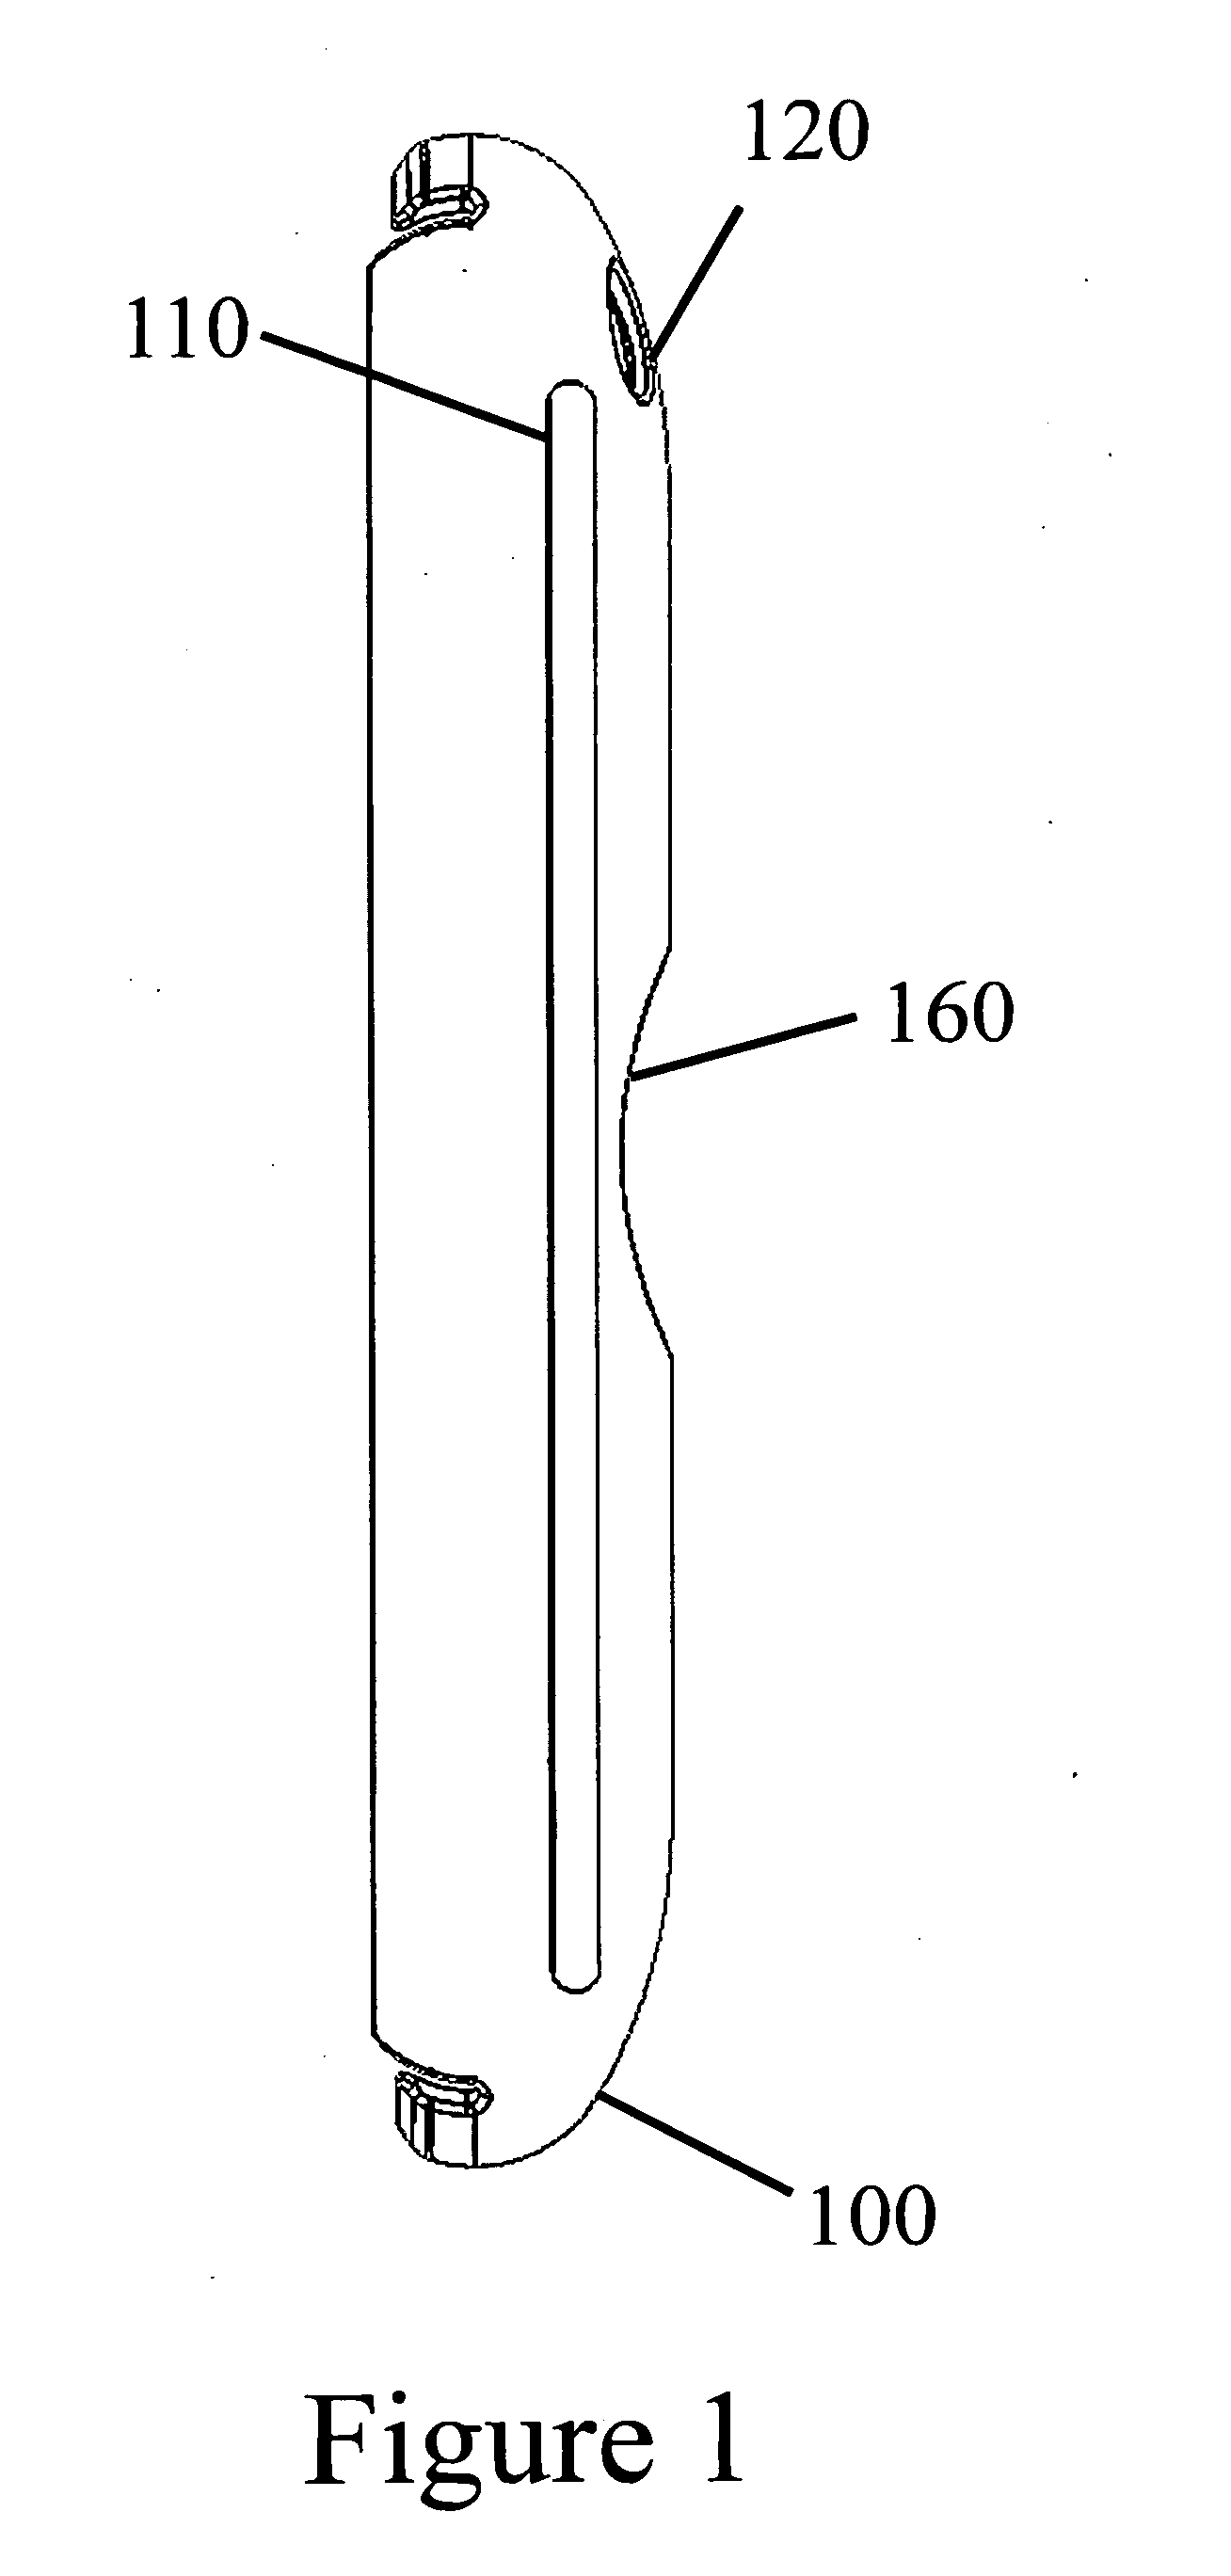 Thin Object Holder Apparatus for Use with a Portable Device Patent